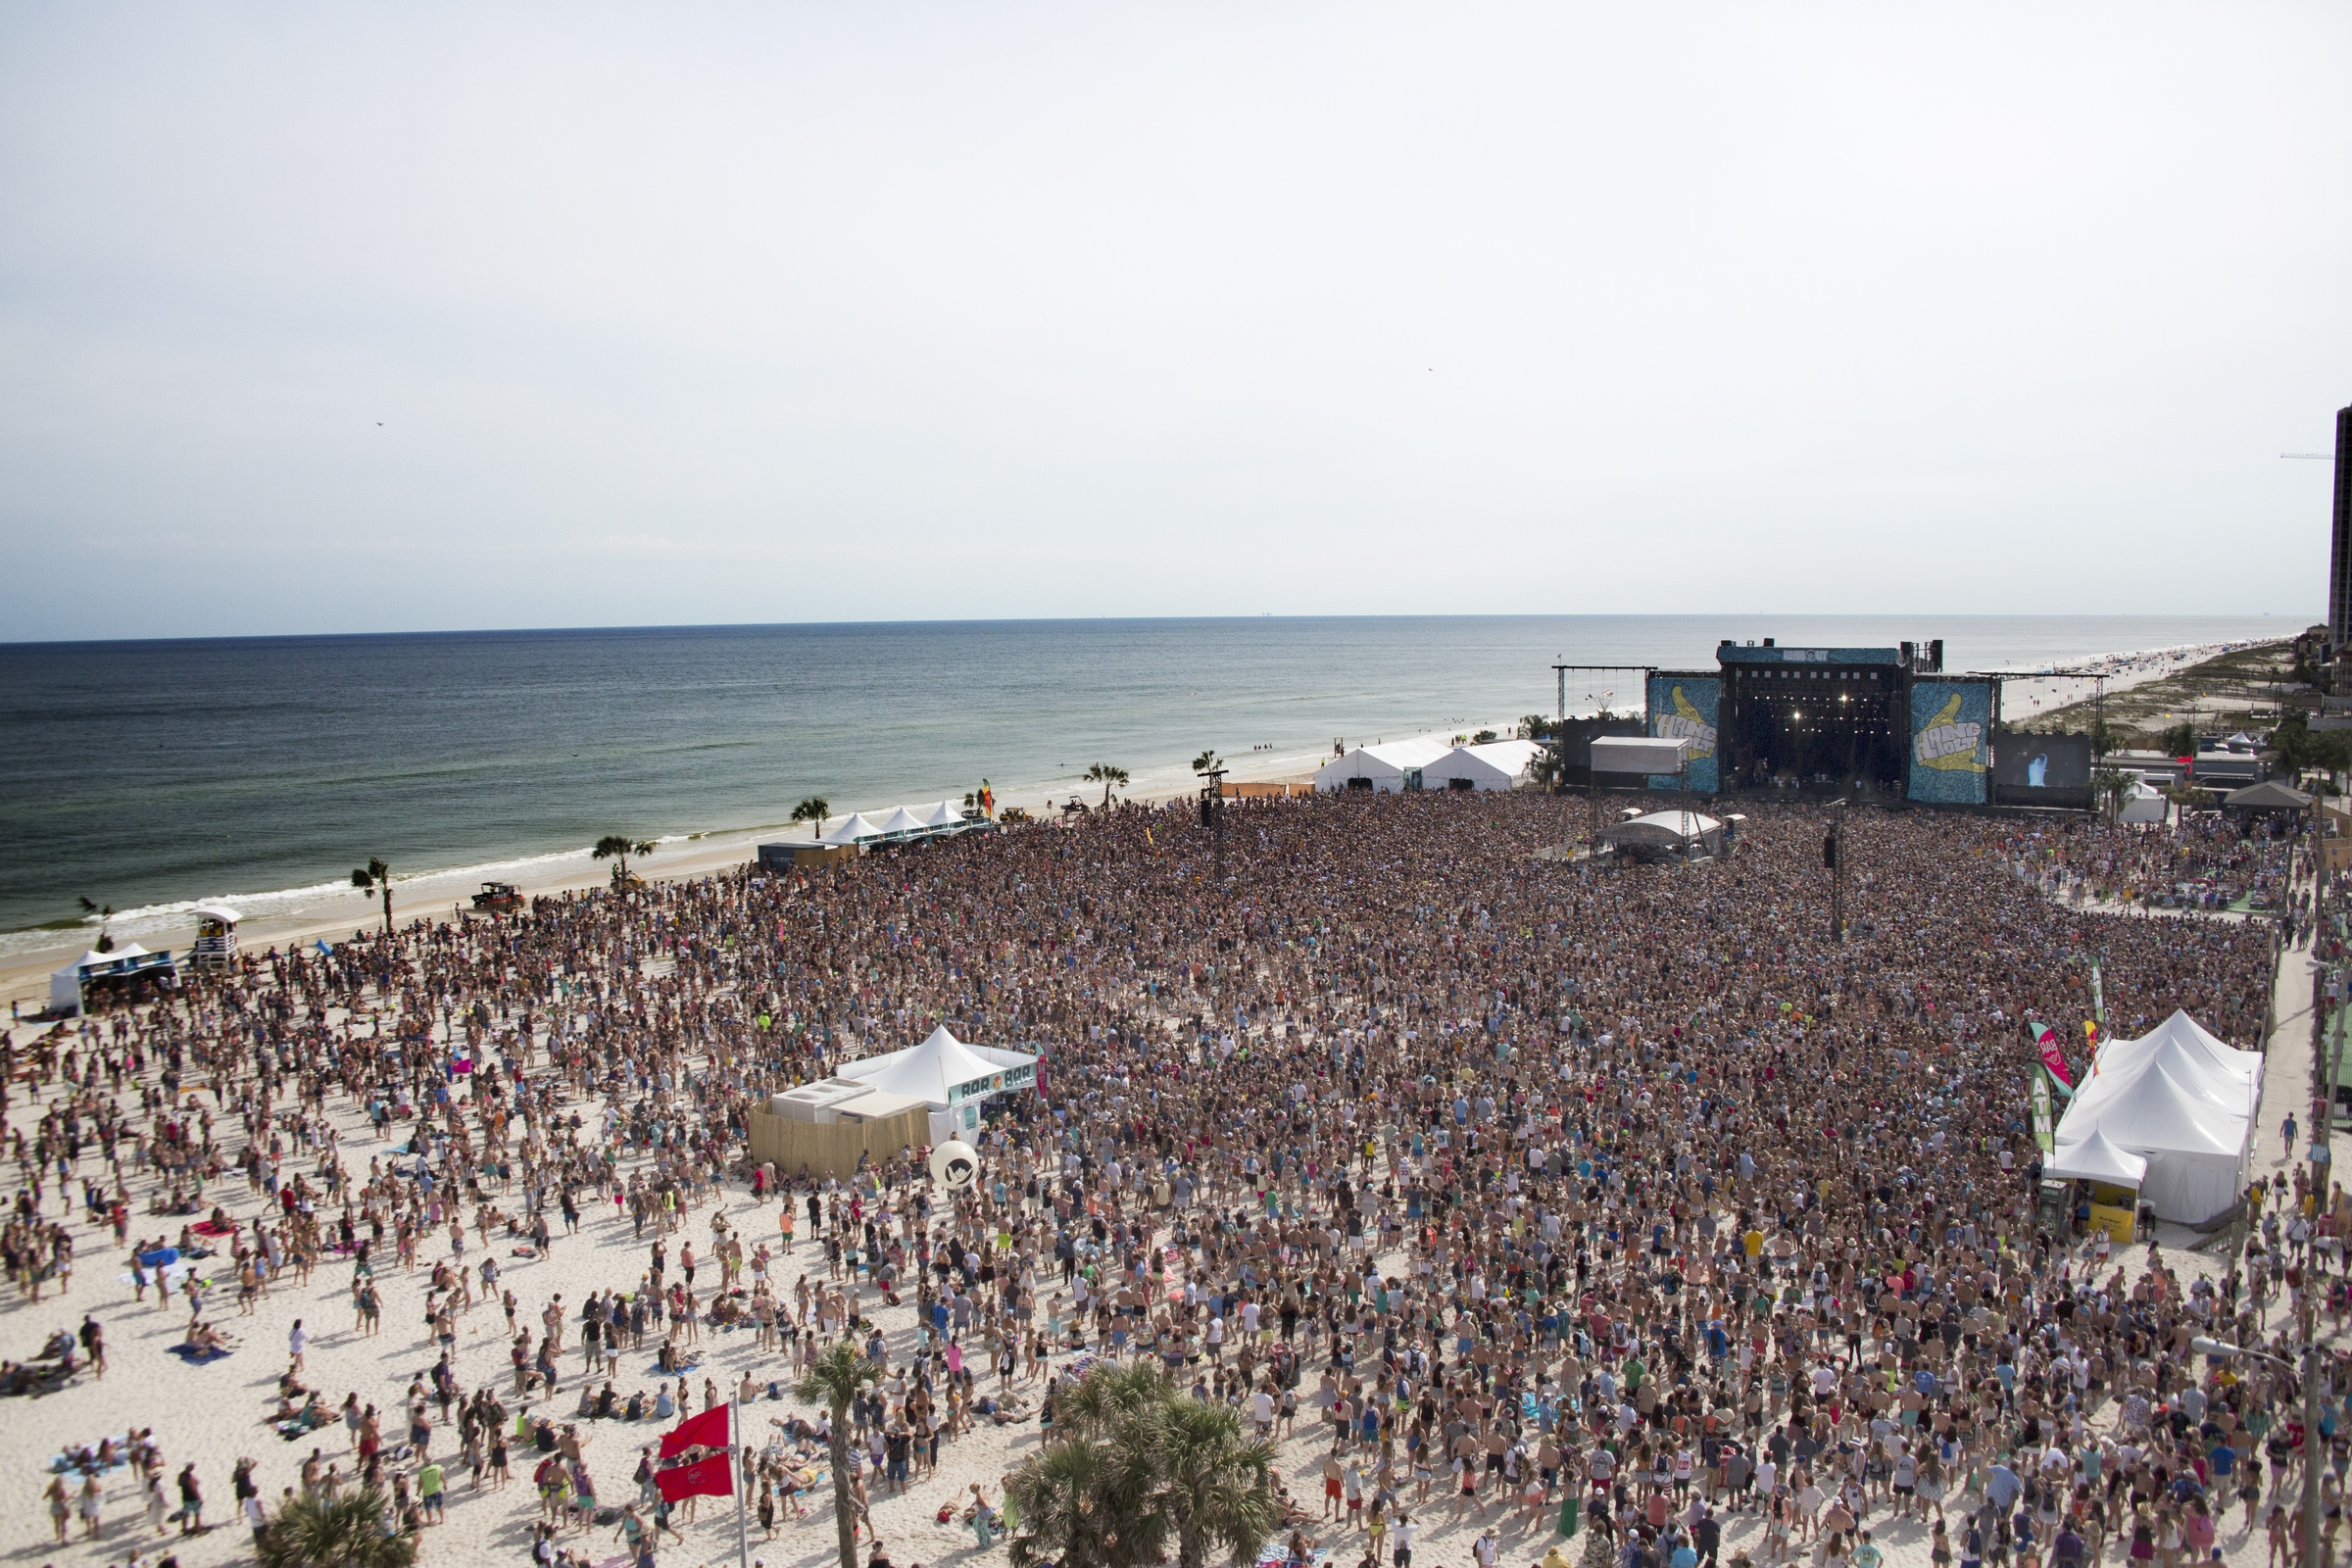 The Hangout Stage packed on Sunday at Hangout Fest 2016. Photo: Courtesy of Hangout Music Festival